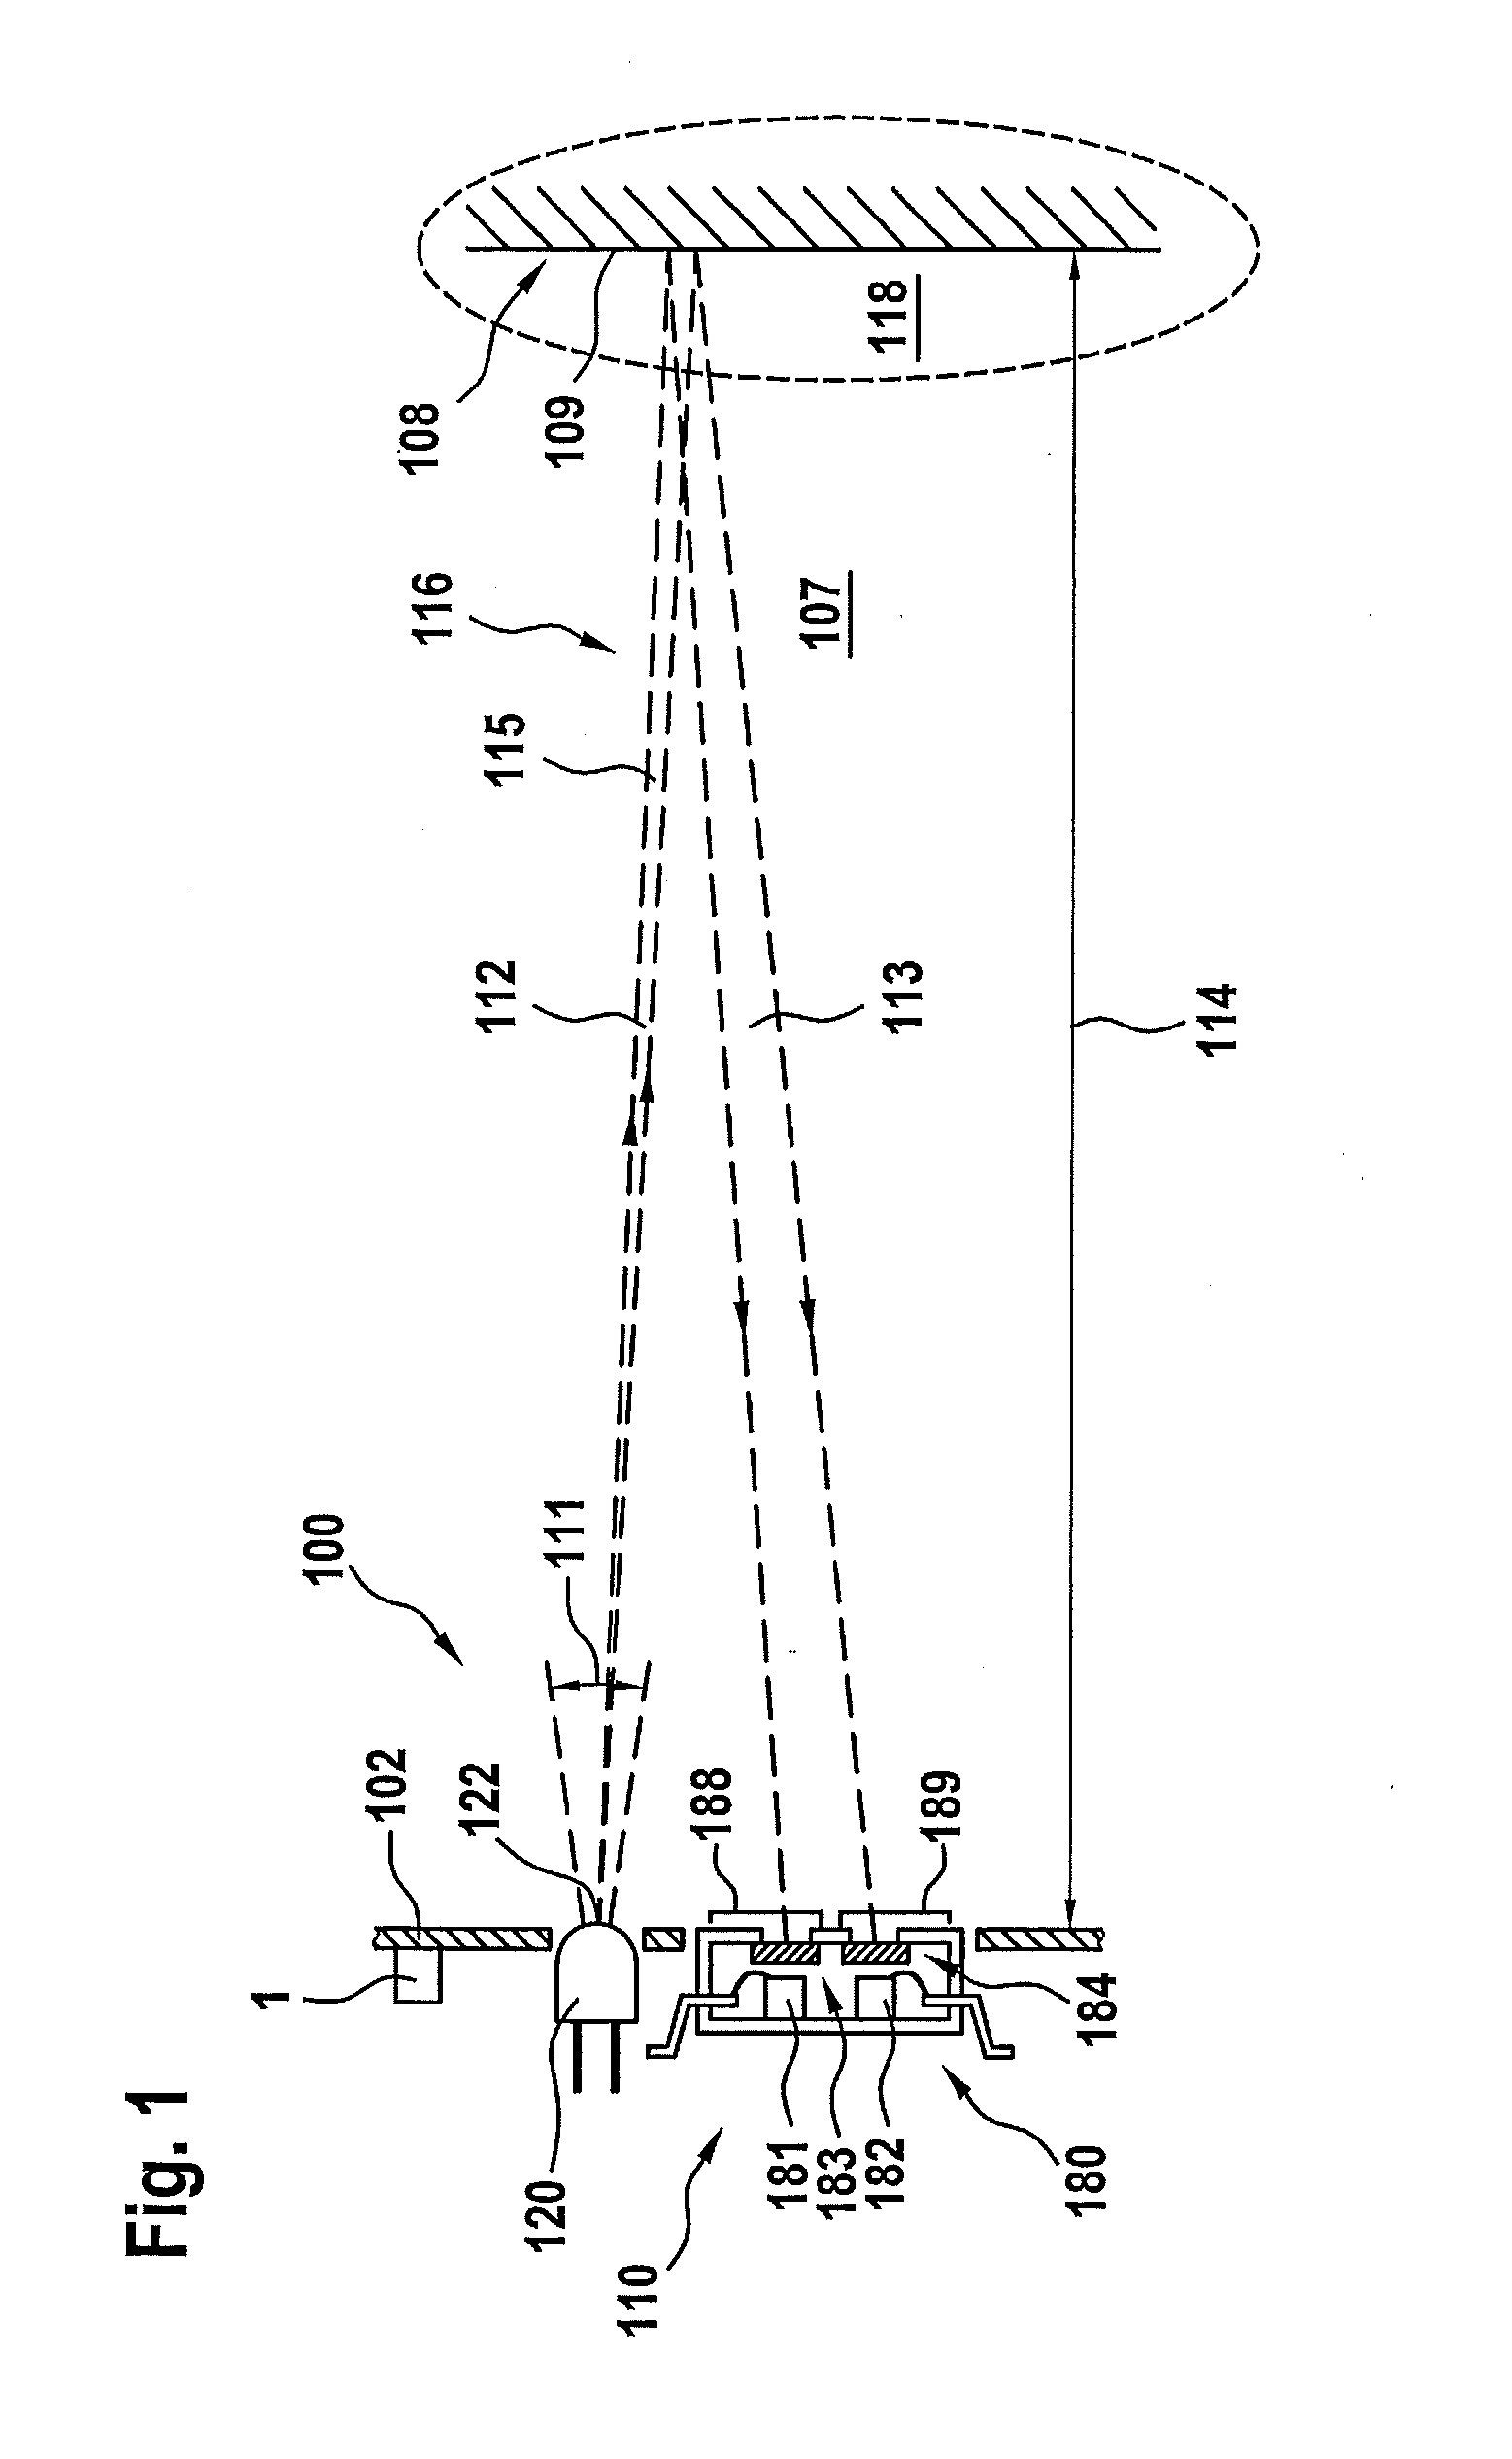 Optical gas sensor device and method for determining the concentration of a gas